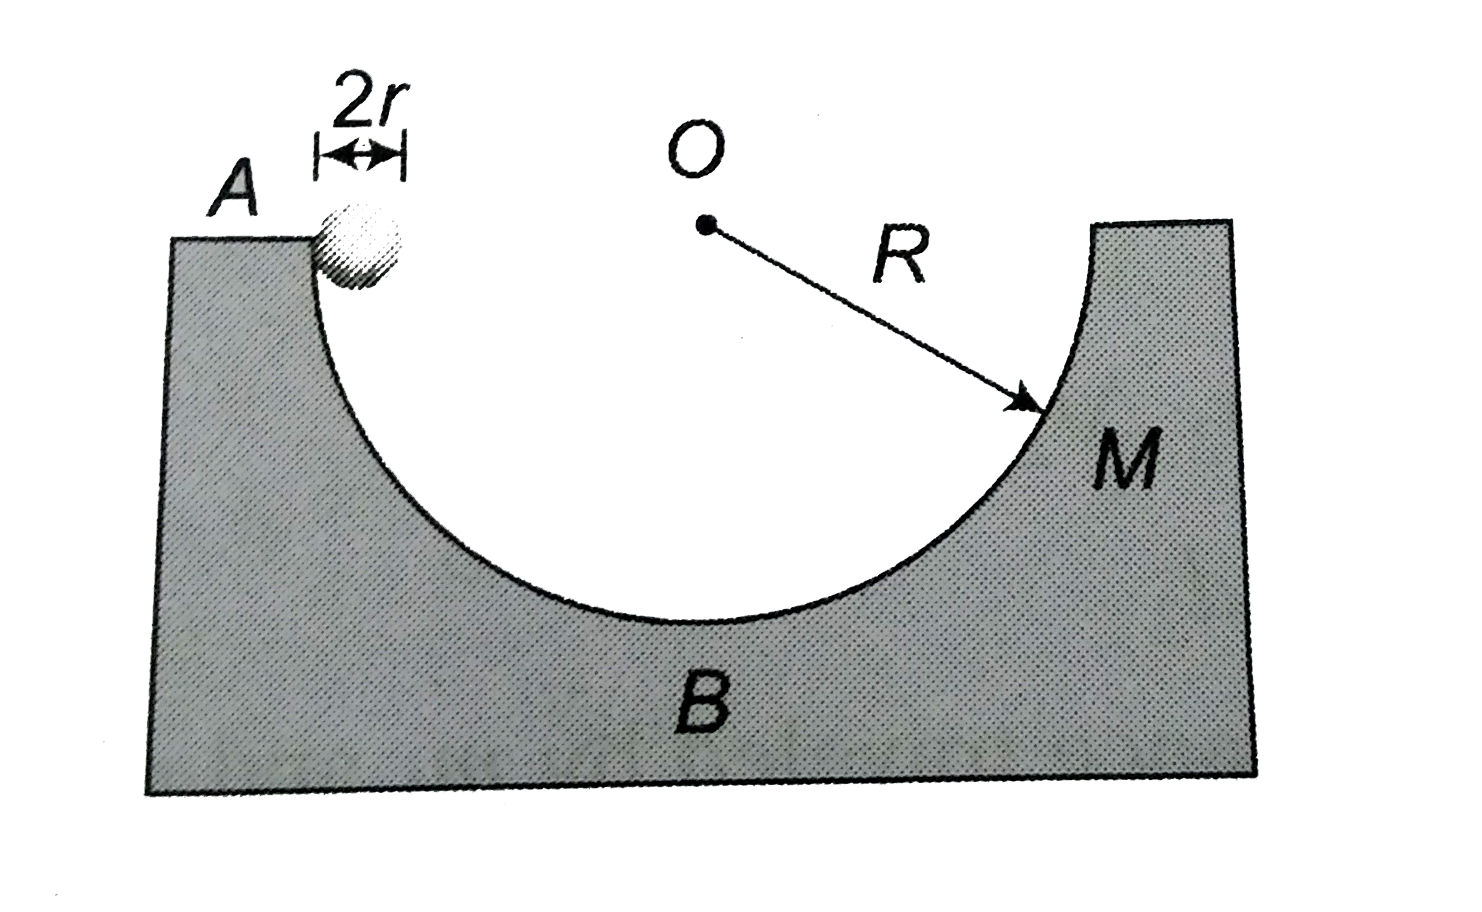 All surfaces are smooth. The ball of mass m is released from A. Find the distance travelled by the block of mass M.